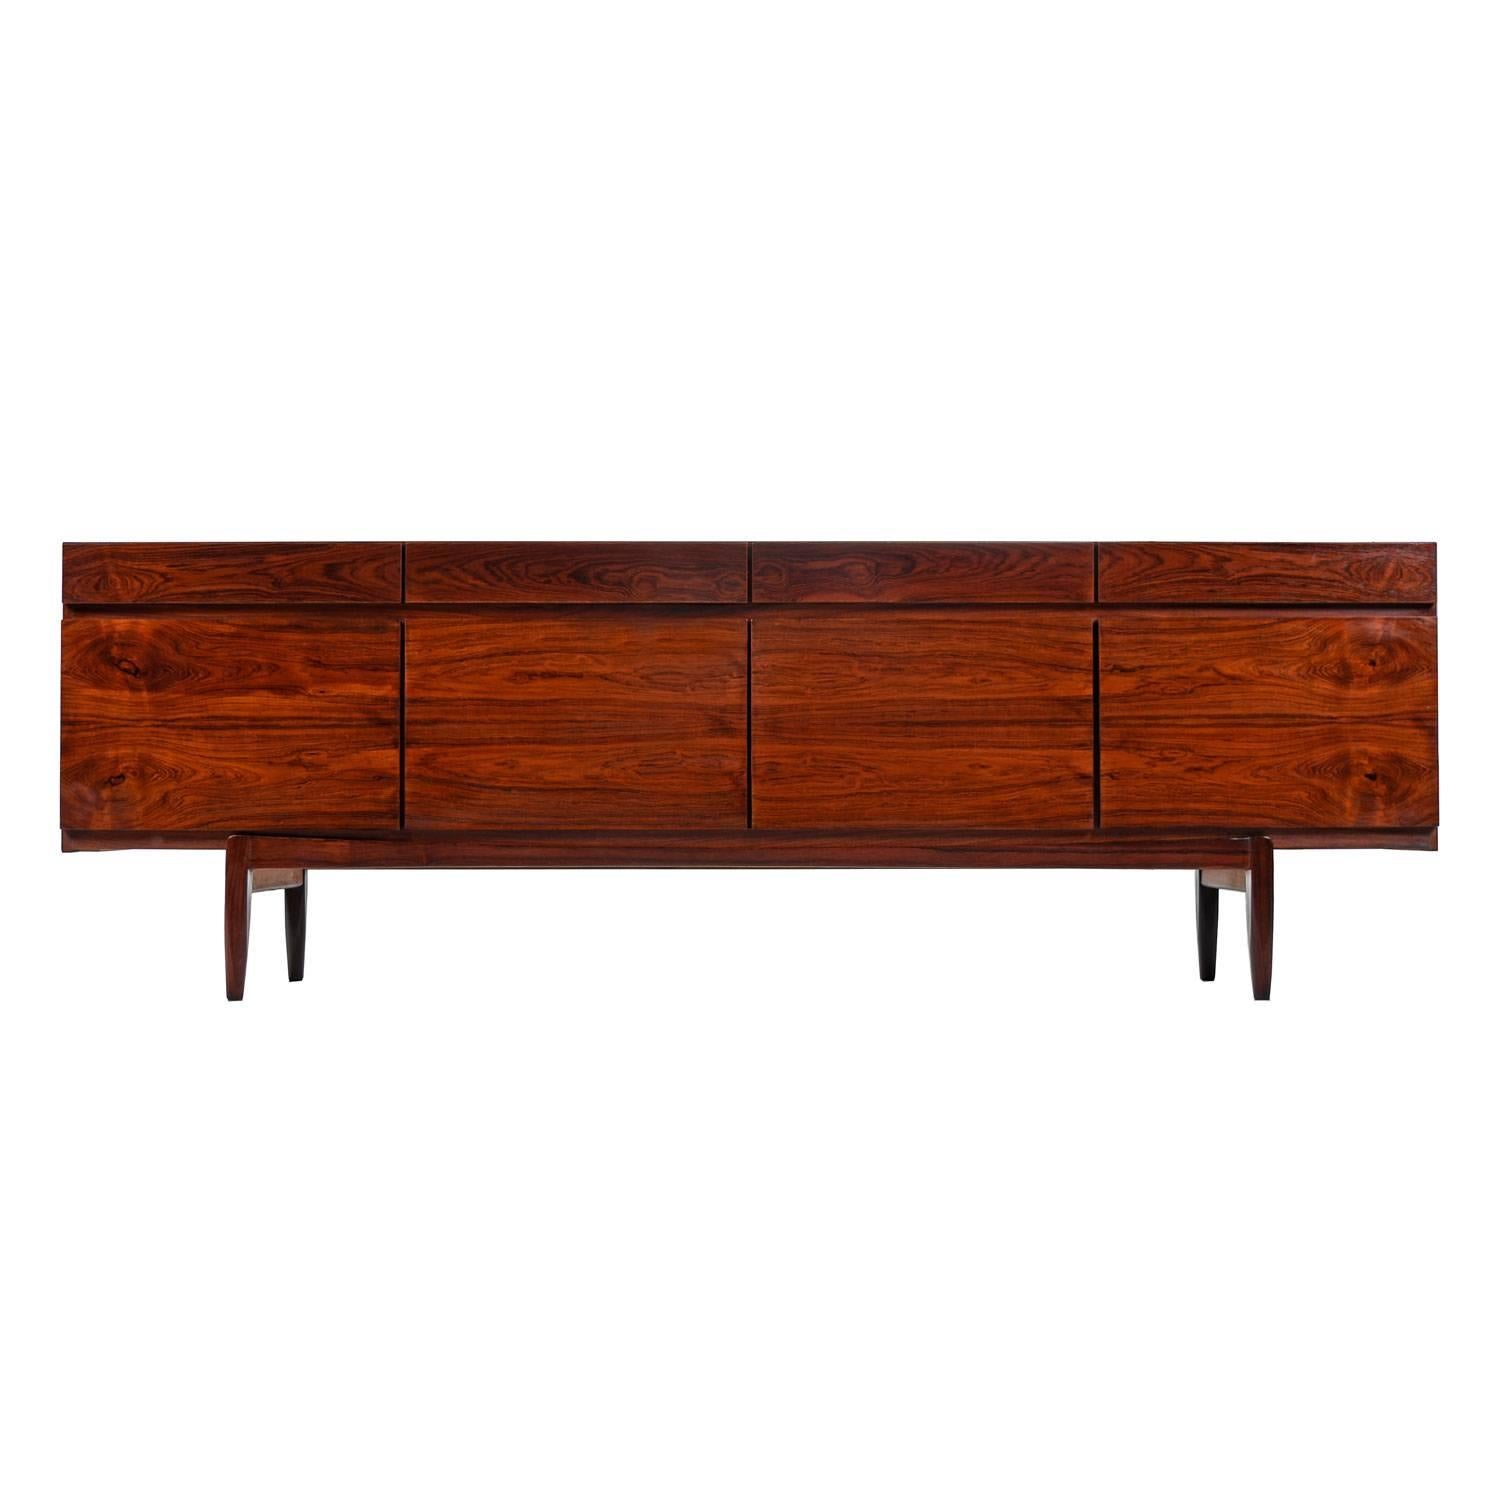 The rich, oxblood colored rosewood is the high water mark of Scandinavian cabinet making. Notice the wild, flaring, cathedral grain. The old growth trees that supplied manufacturers during the midcentury are long gone. Matched grain pattern cabinet